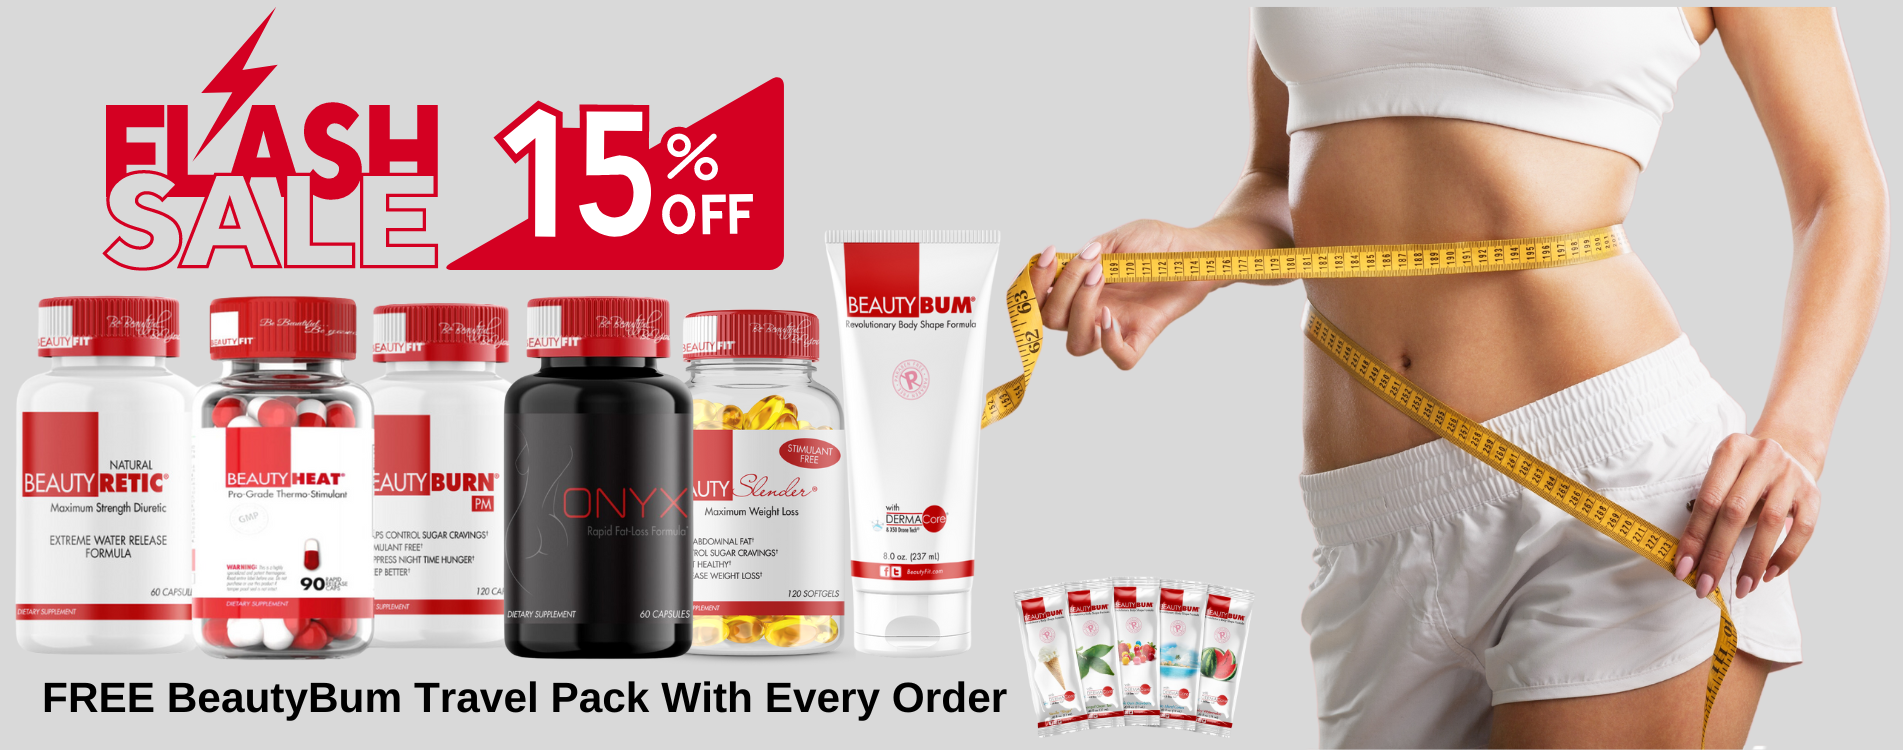 Flash SALE women's supplements for weight loss Fat Loss & energy